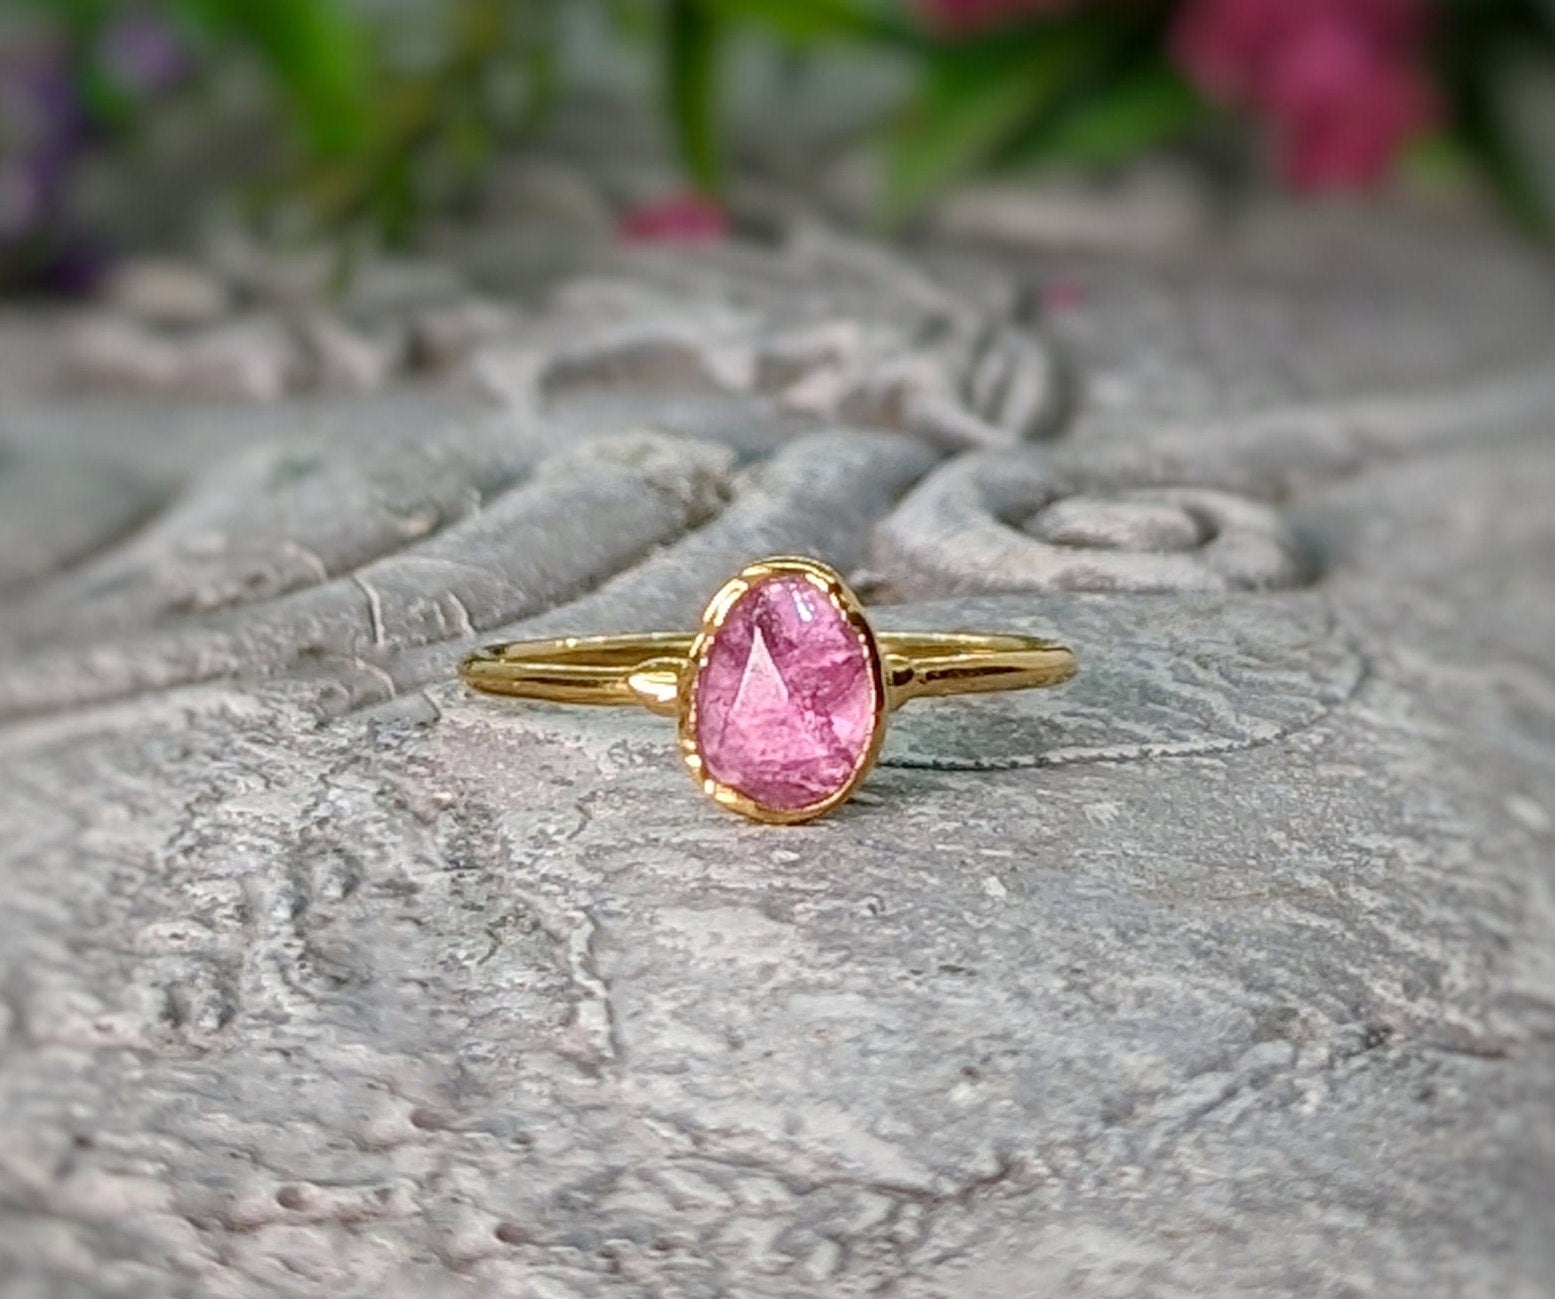 Pink Tourmaline ring - October Birthstone ring in unique organic 18k Gold setting